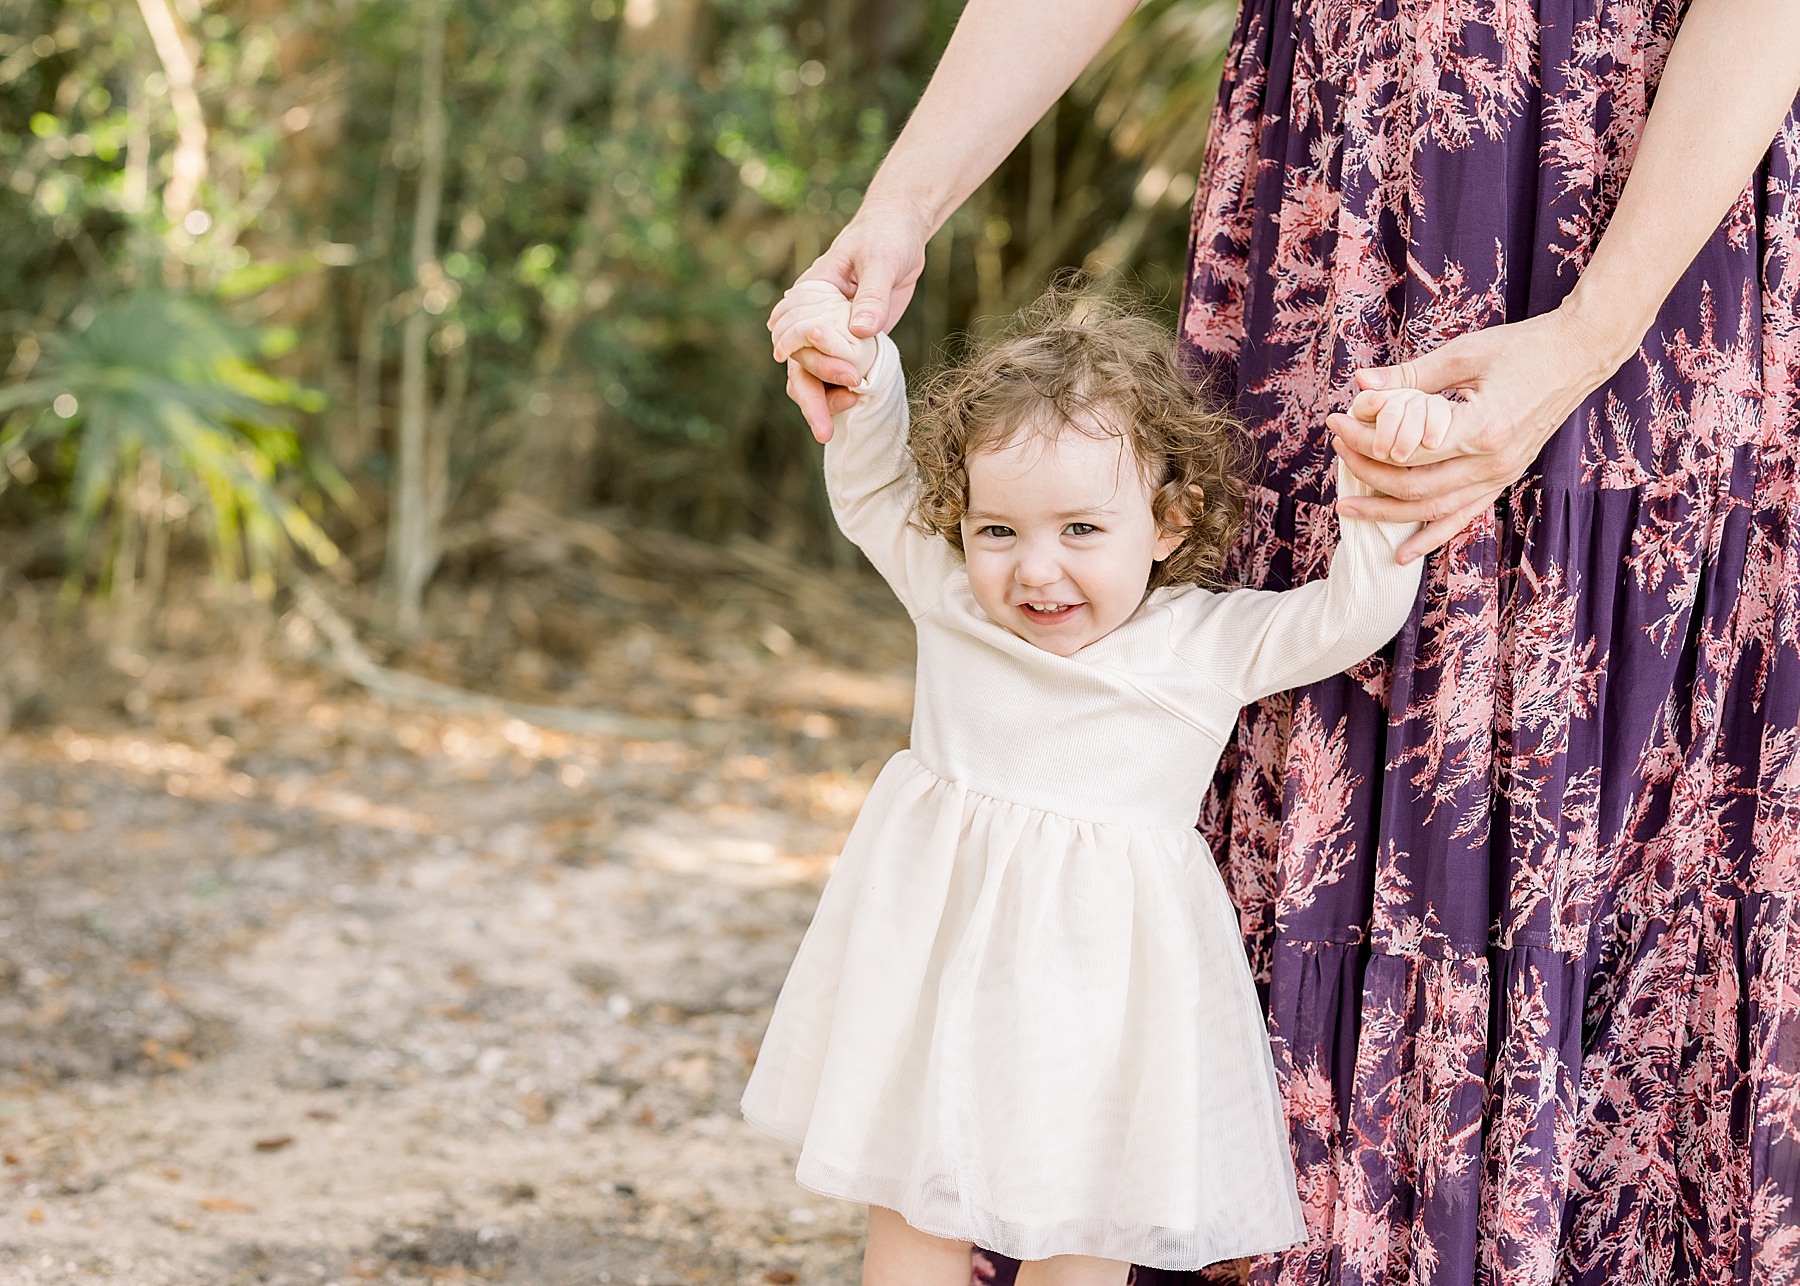 little girl in cream dress smiling walking with mom holding her hands